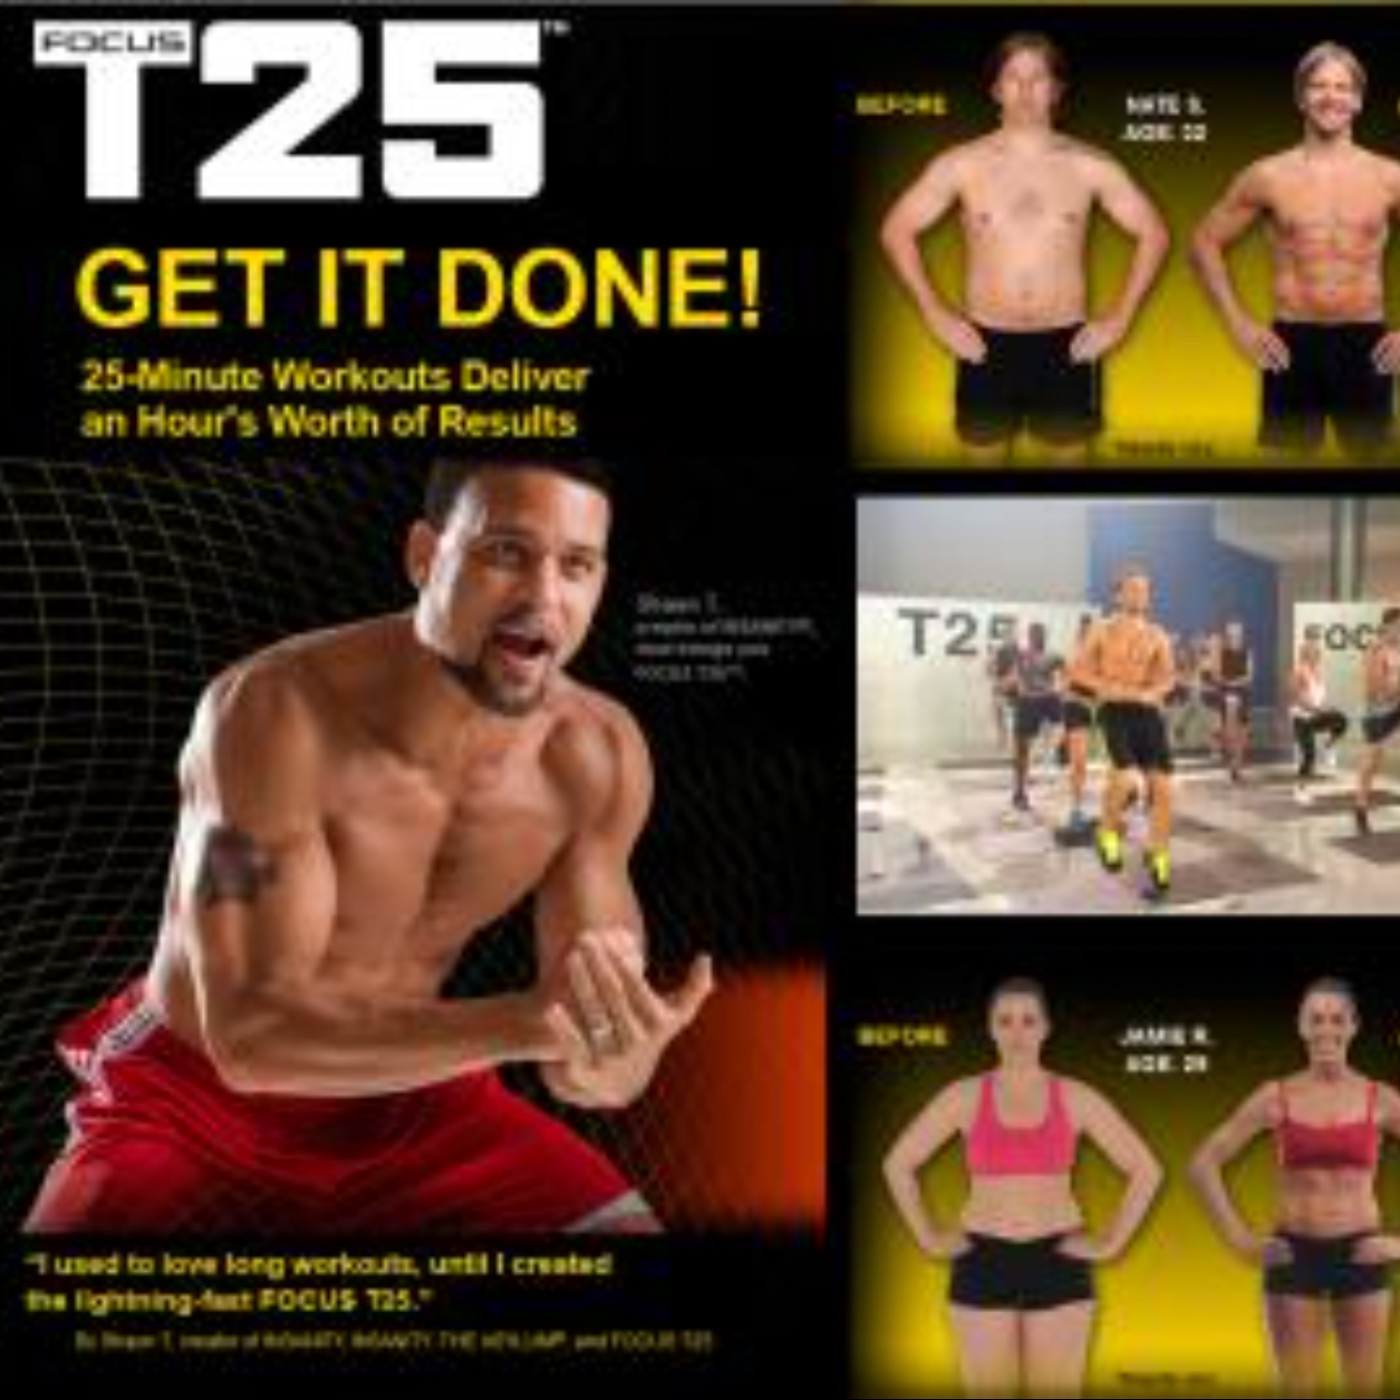 Focus T25 - A home workout that delivers results in 25 mins per day